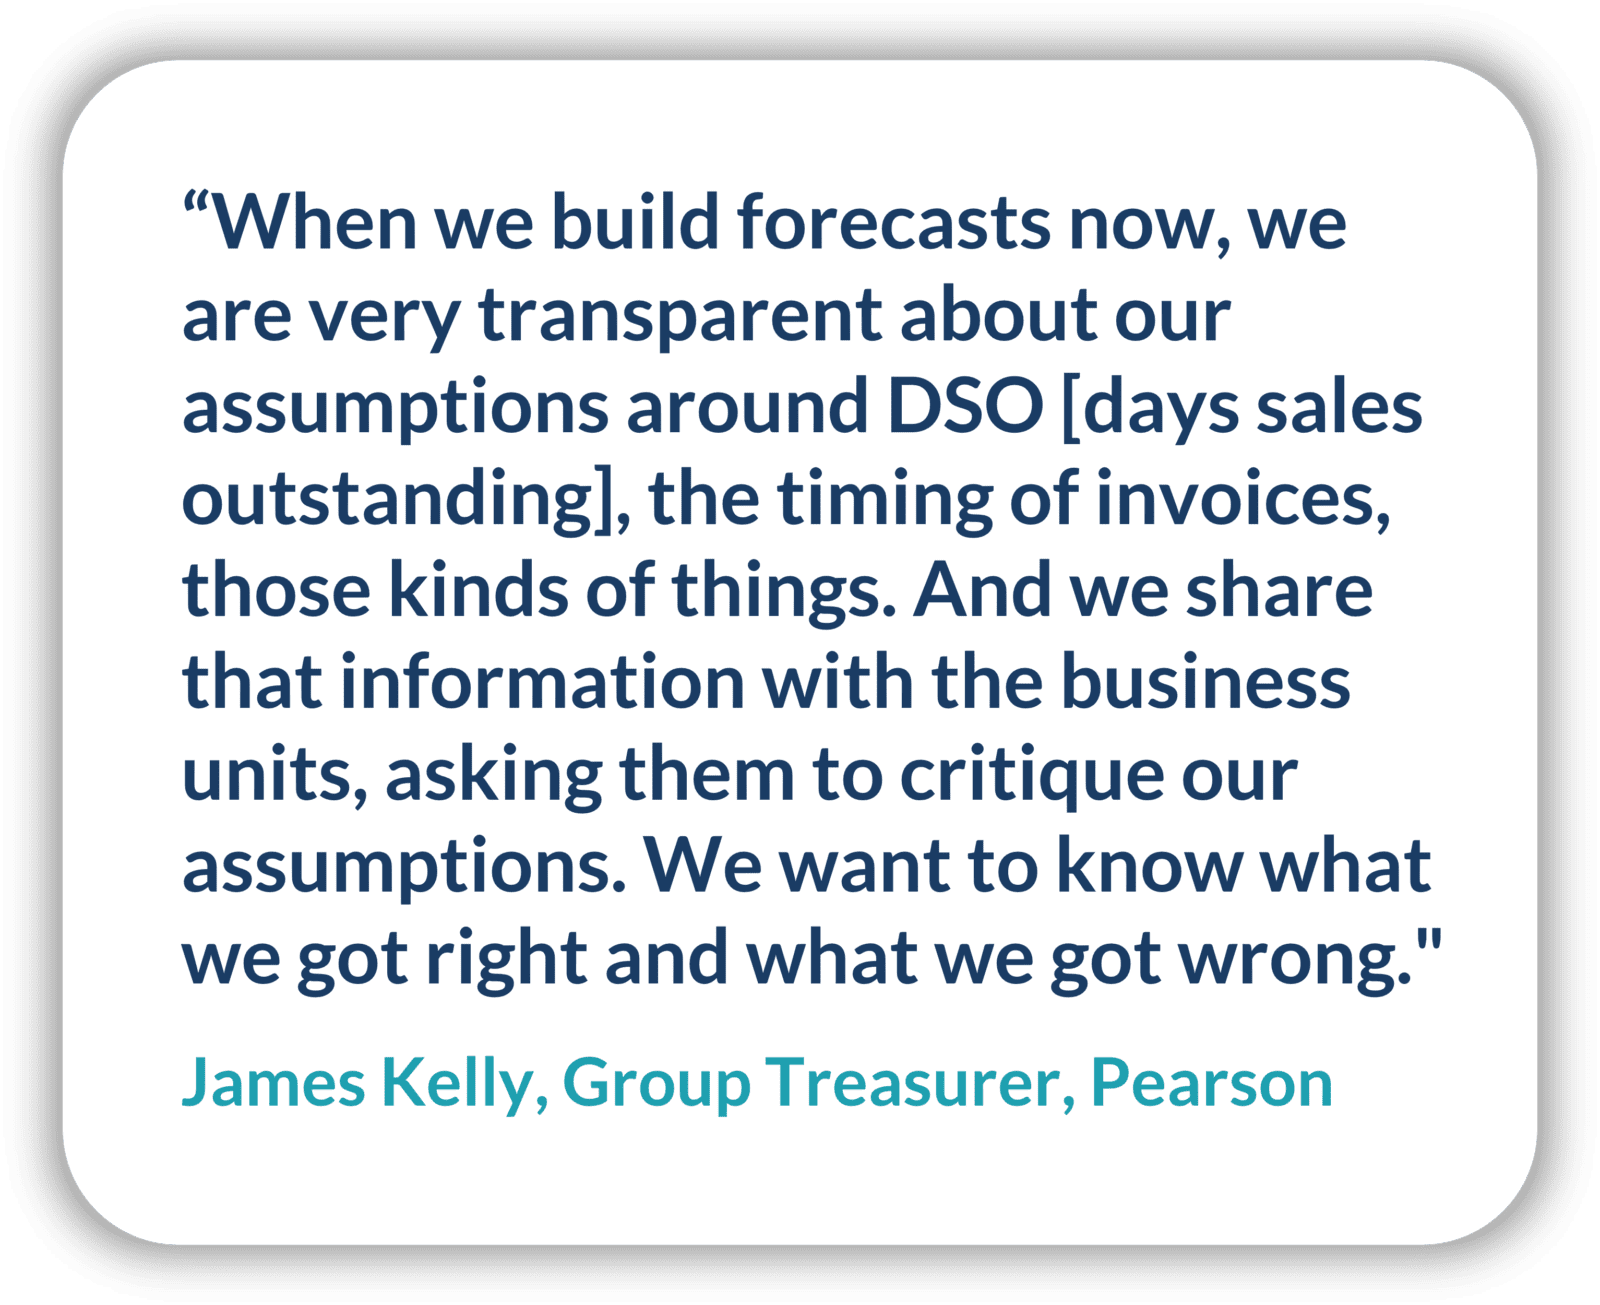 A quote from Pearson's Group Treasurer James Kelly about his new cash forecasting process.